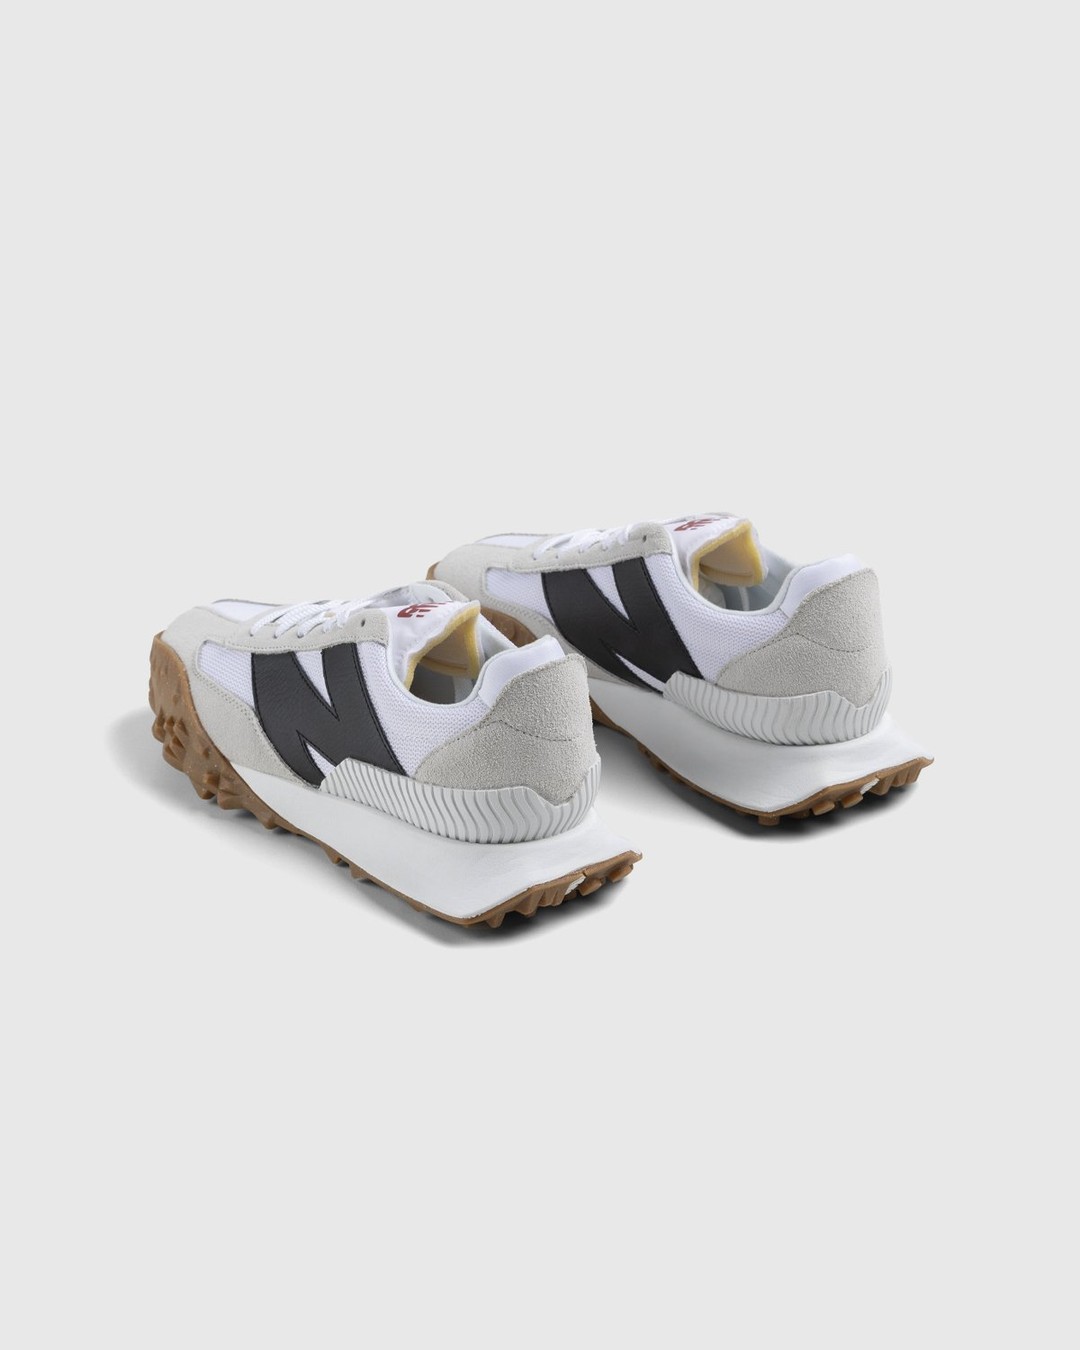 New Balance – XC-72 White - Low Top Sneakers - White - Image 4